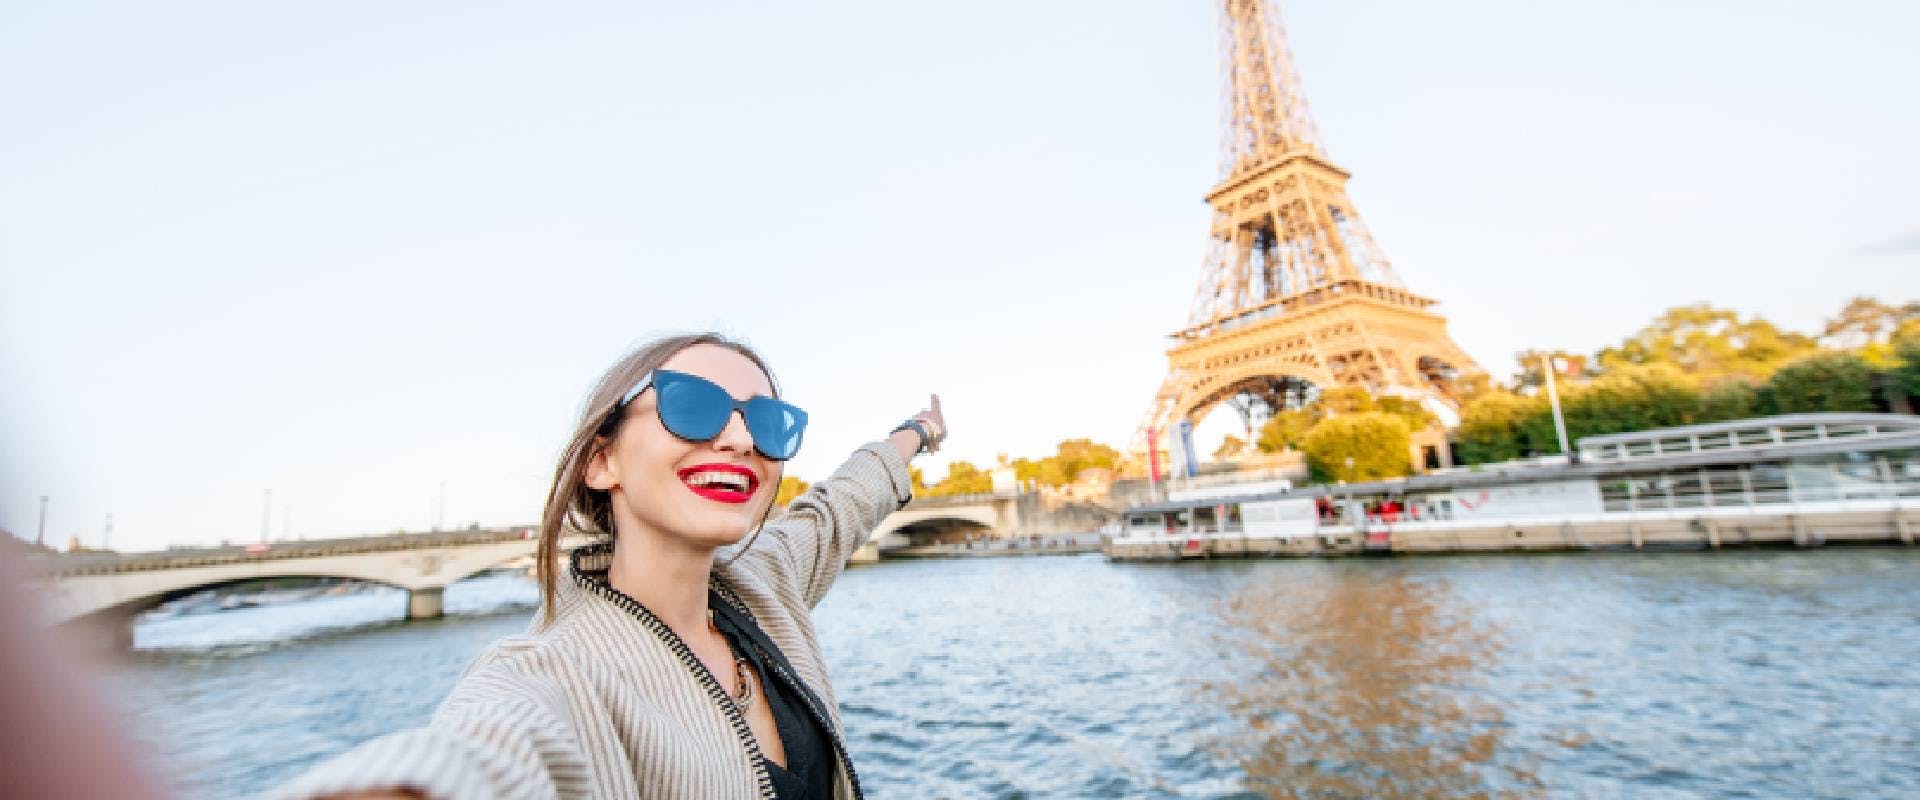 Person taking a selfie with the Eiffel Tower